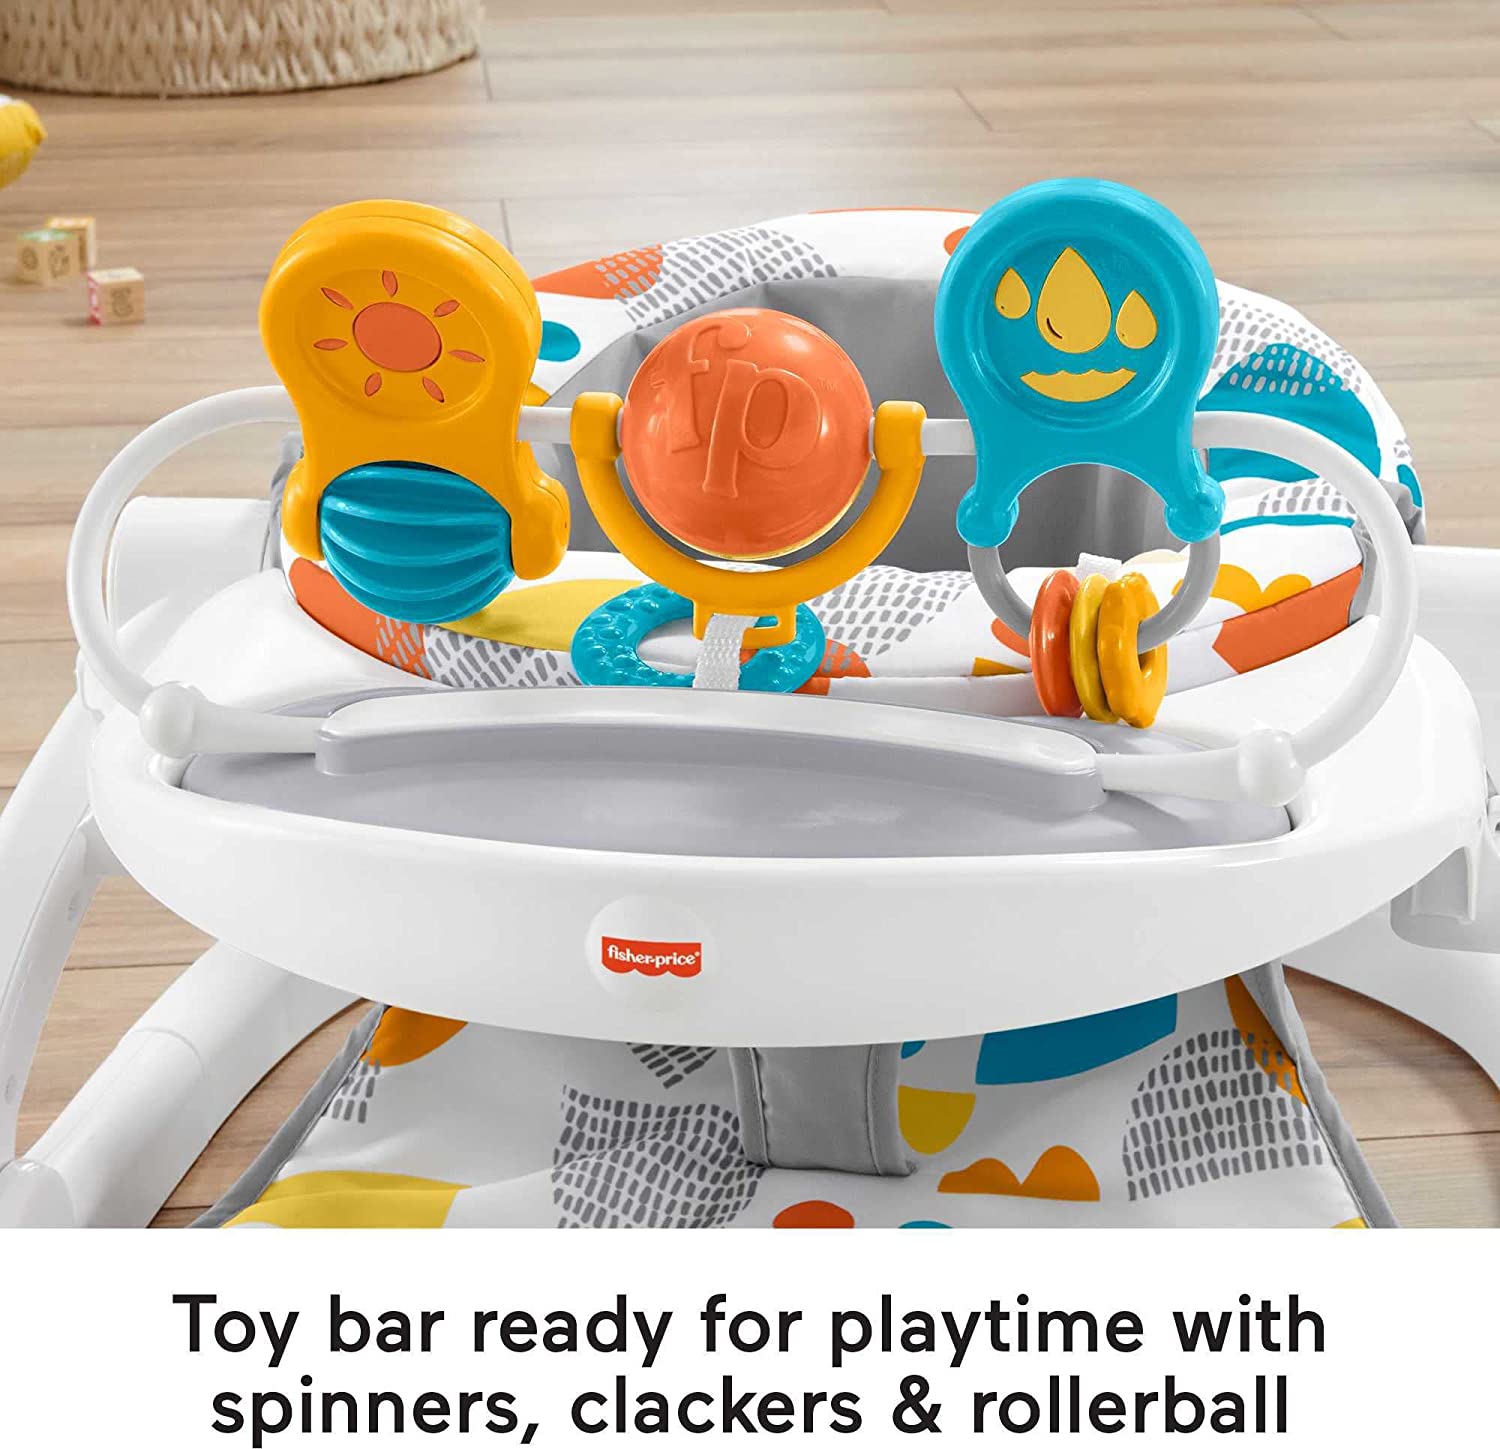 Fisher-Price Deluxe Sit-Me-Up Floor Seat, Primary Hills - Portable Infant Chair with Tray and Toy Bar